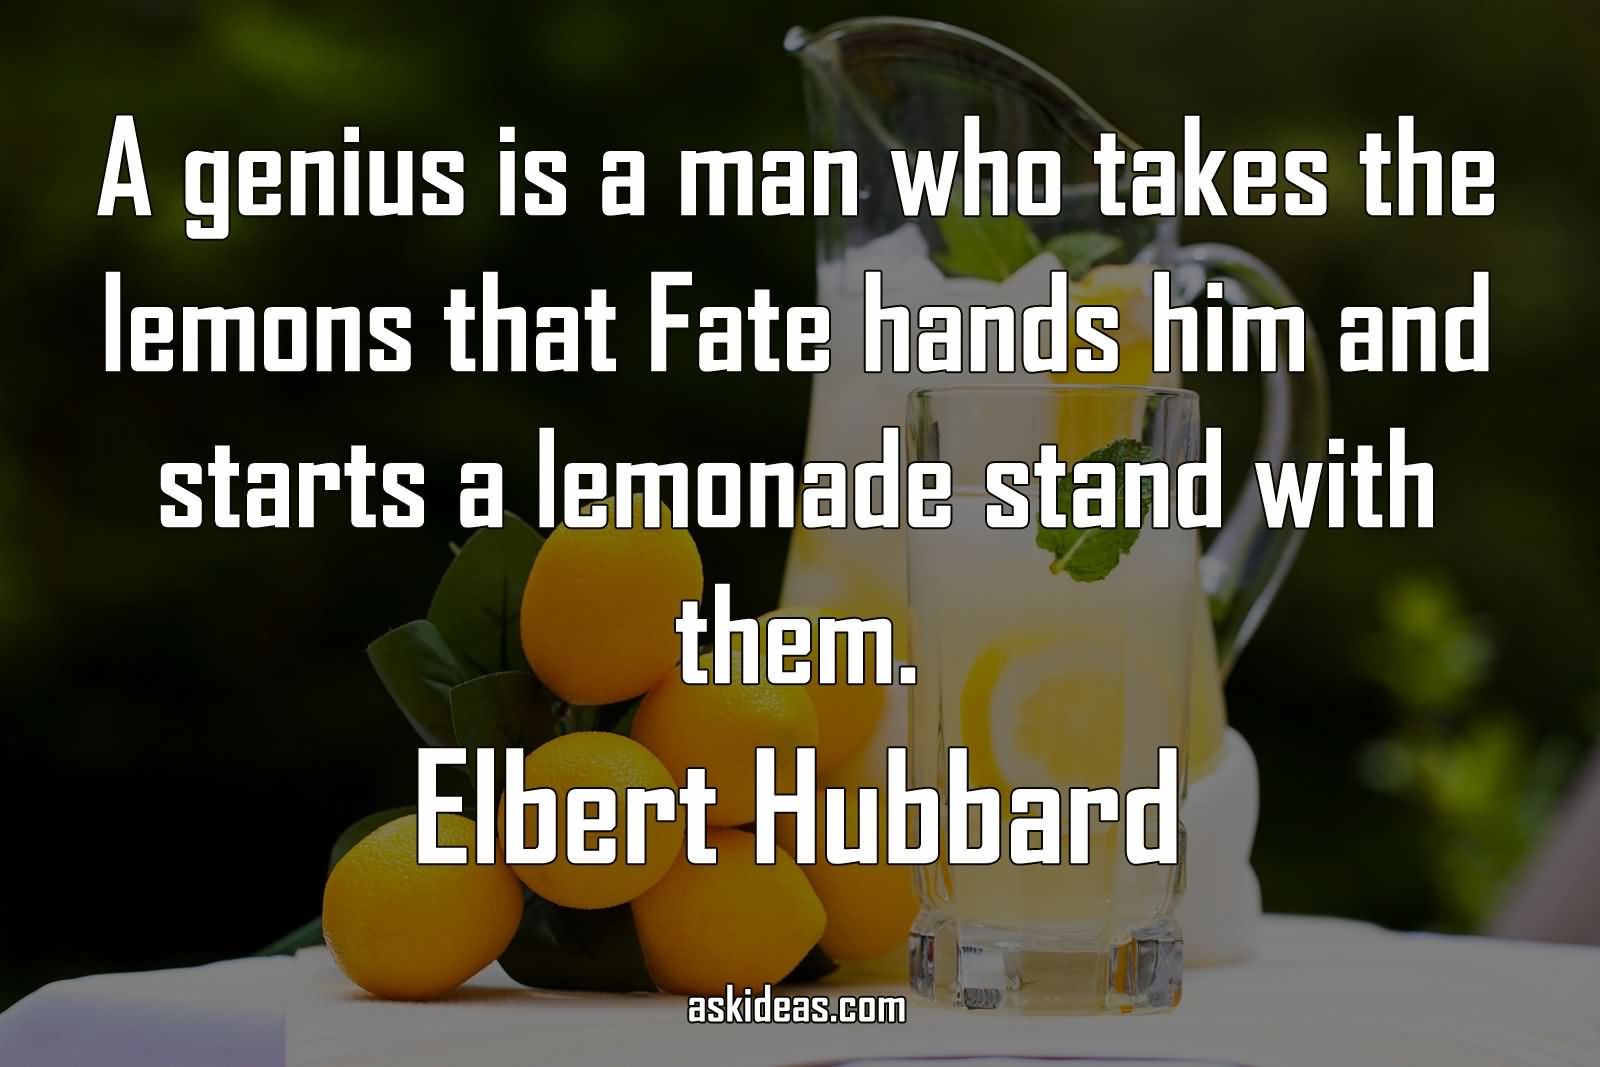 A genius is a man who takes the lemons that Fate hands him and starts a lemonade stand with them.